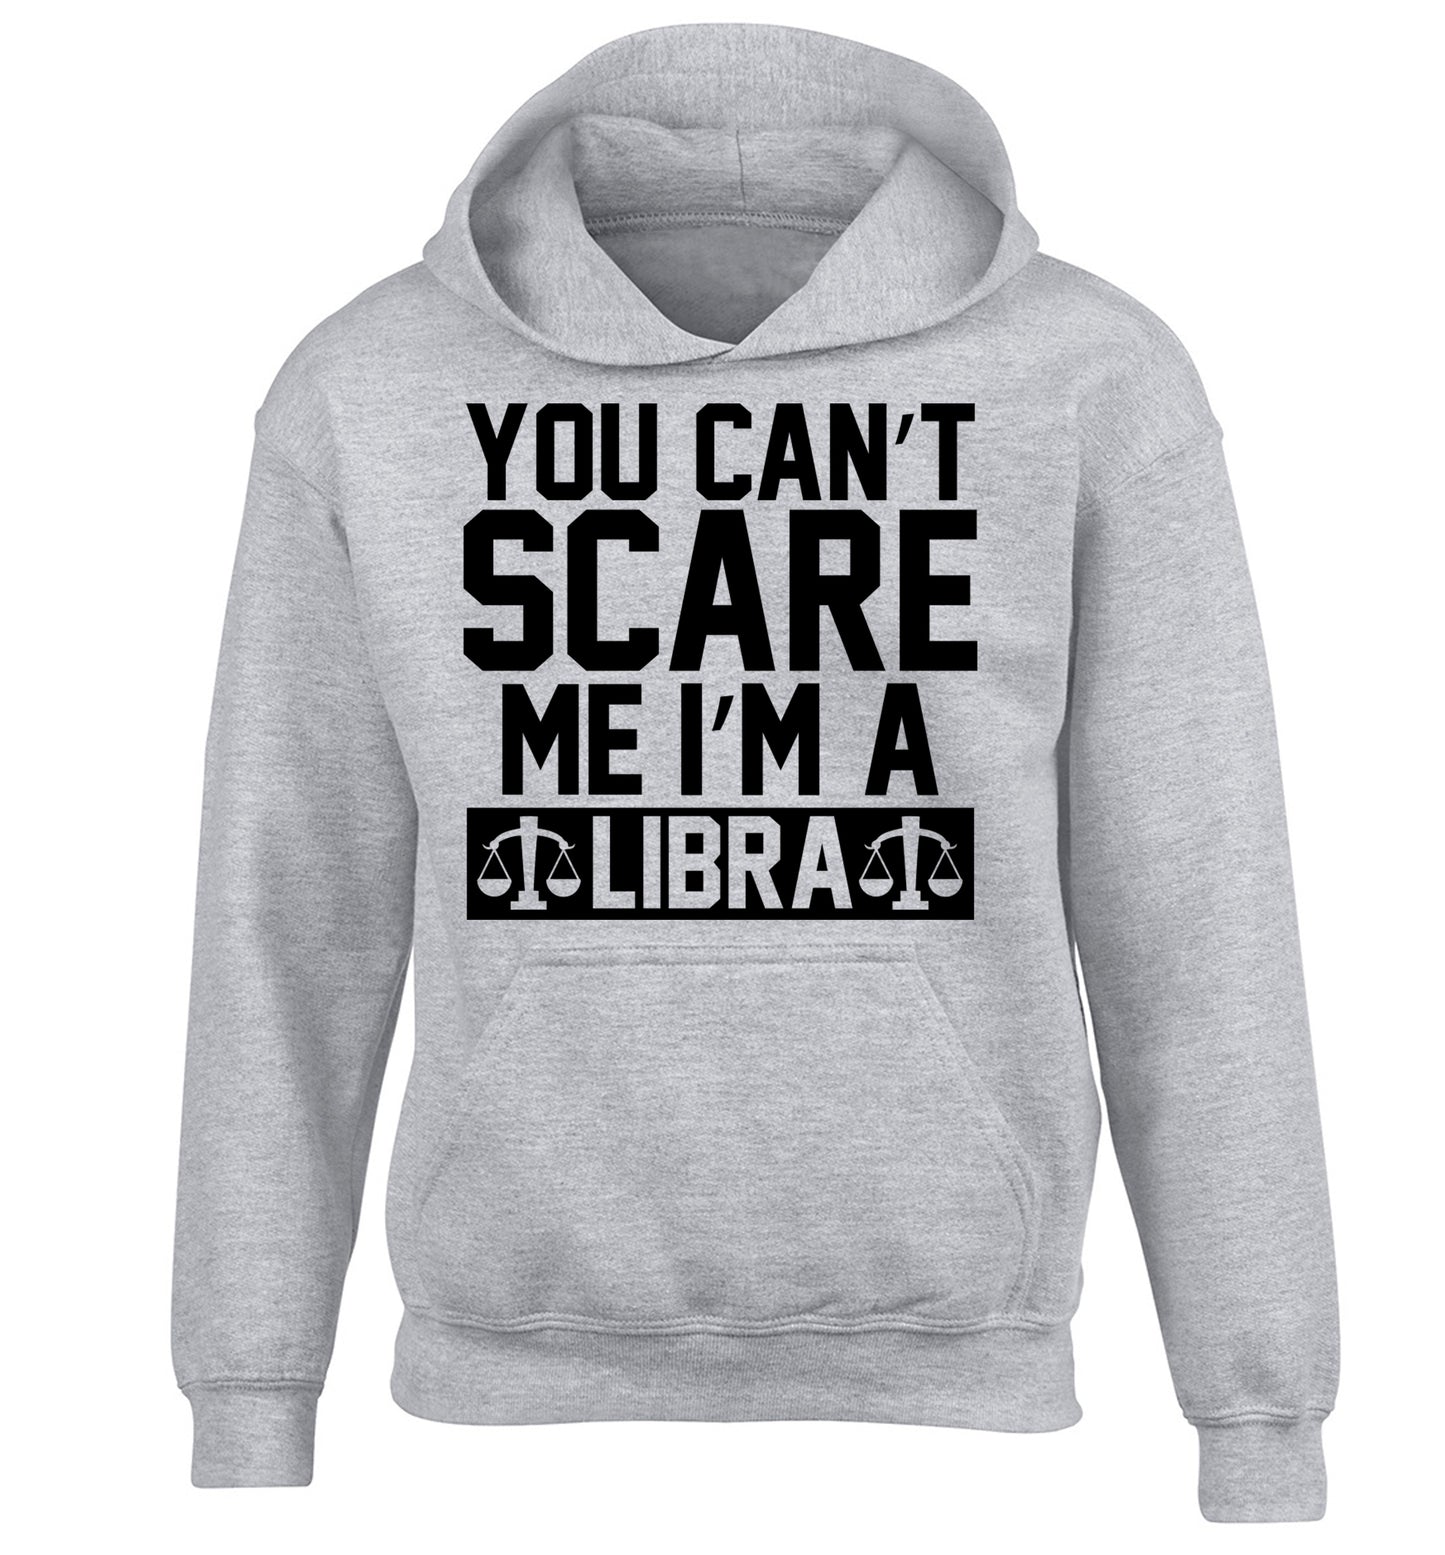 You can't scare me I'm a libra children's grey hoodie 12-13 Years